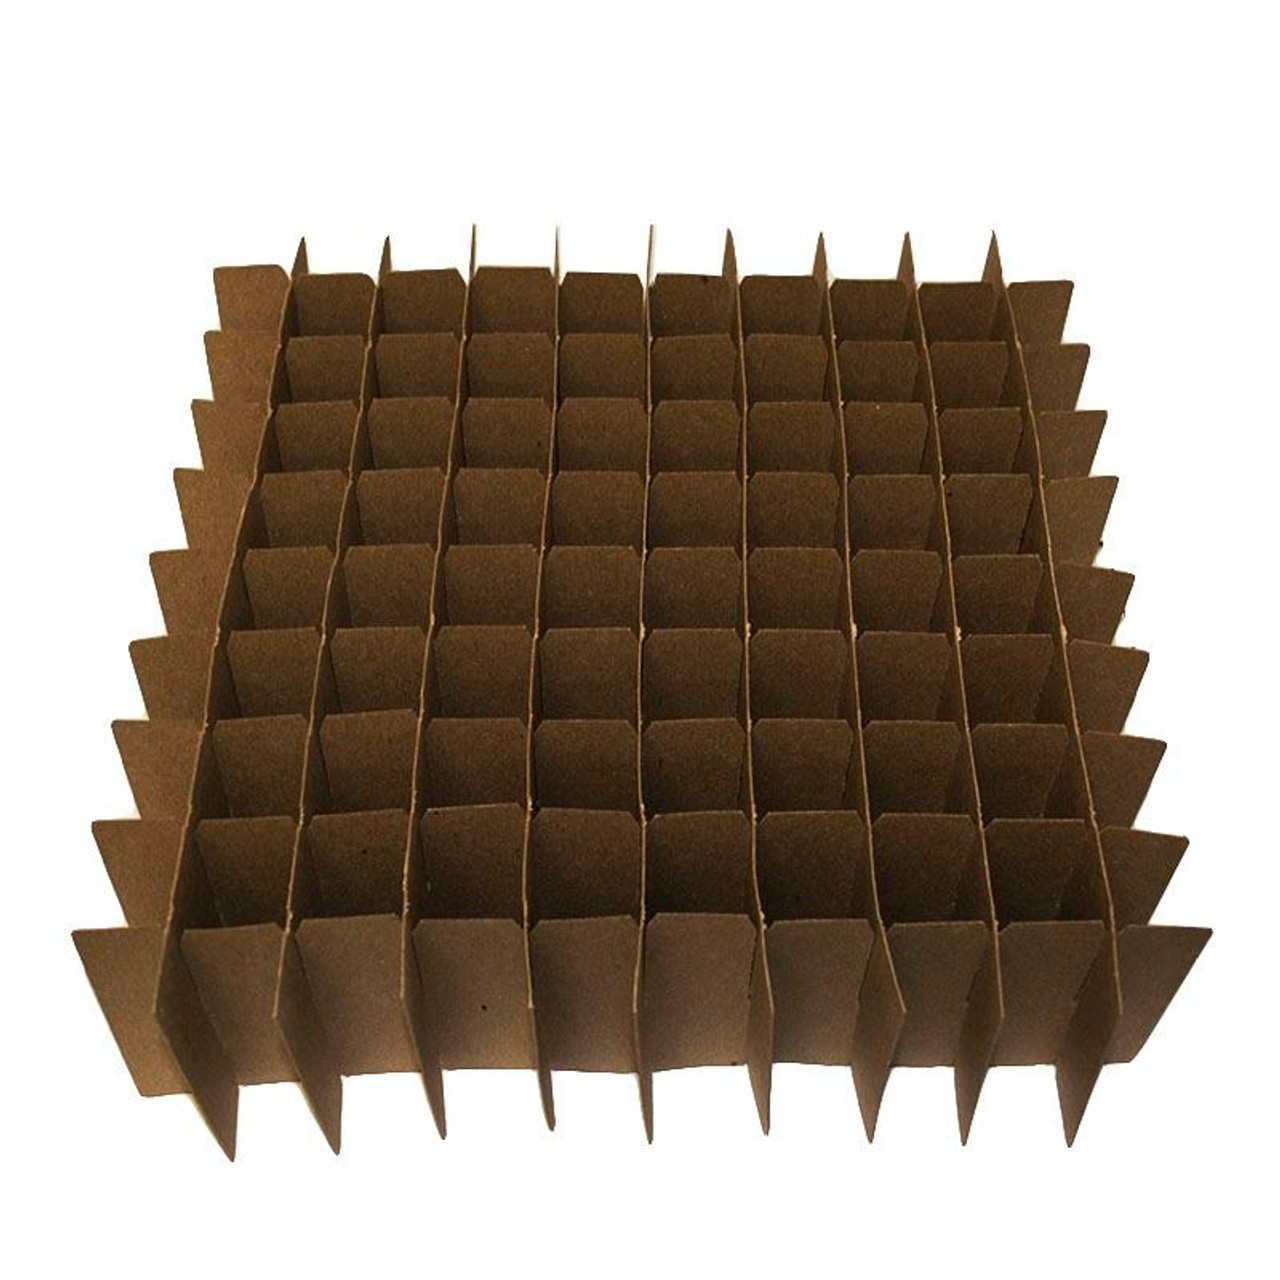 Only Partitions dividers for 100 Cells boxes (Fits 100 - 15ml, and 30ml  Bottles) - Set of 40